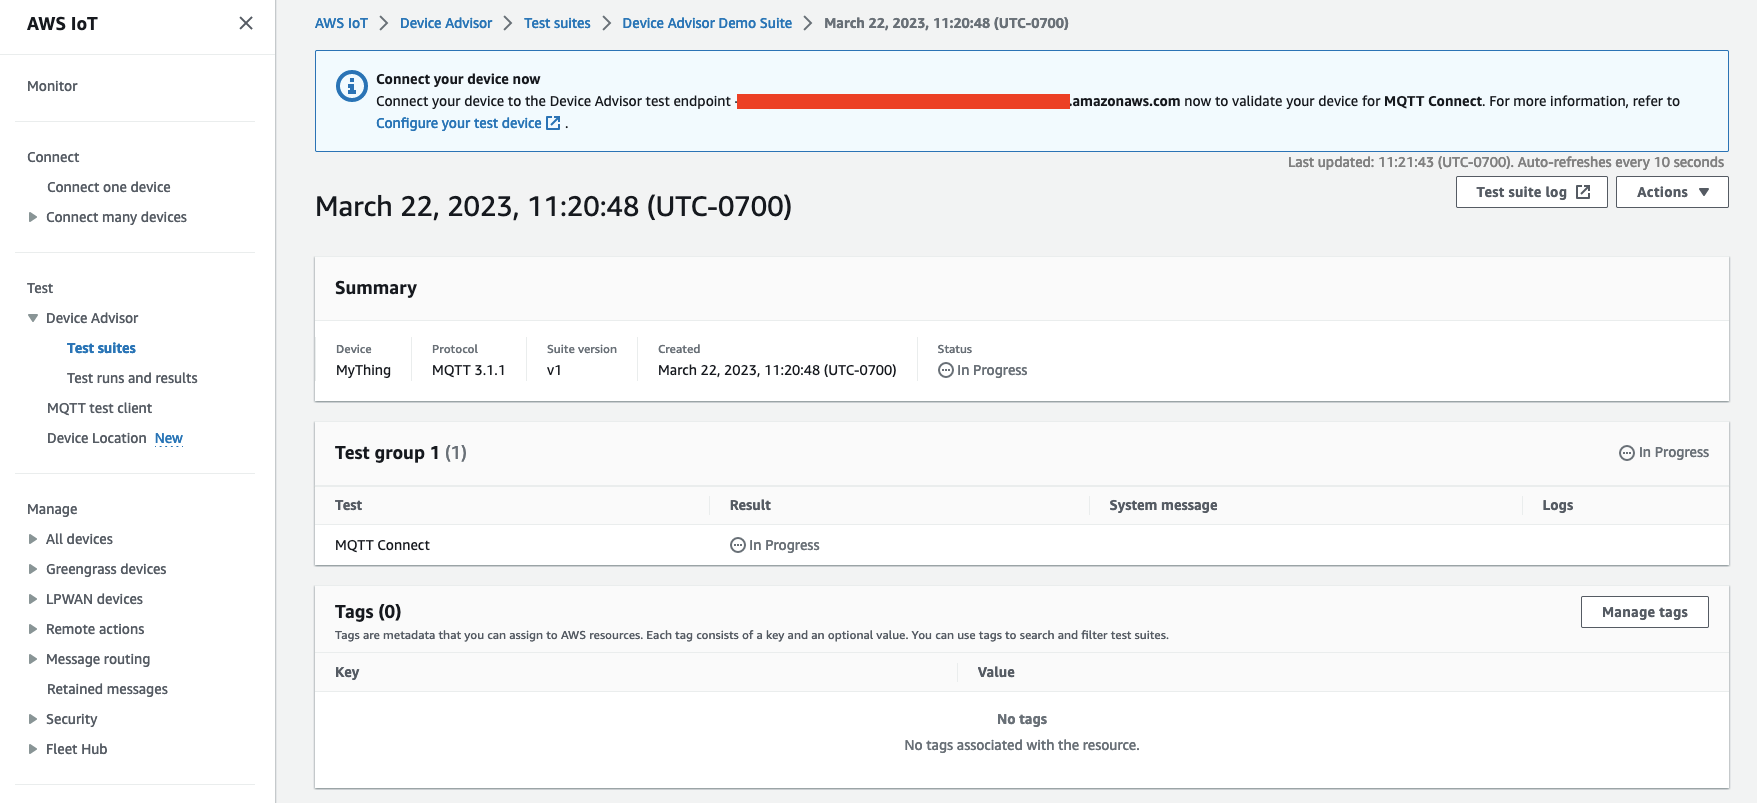 
                        The test suite interface that indicates an MQTT 3.1.1 test is in progress for the device "MyThing".
                    